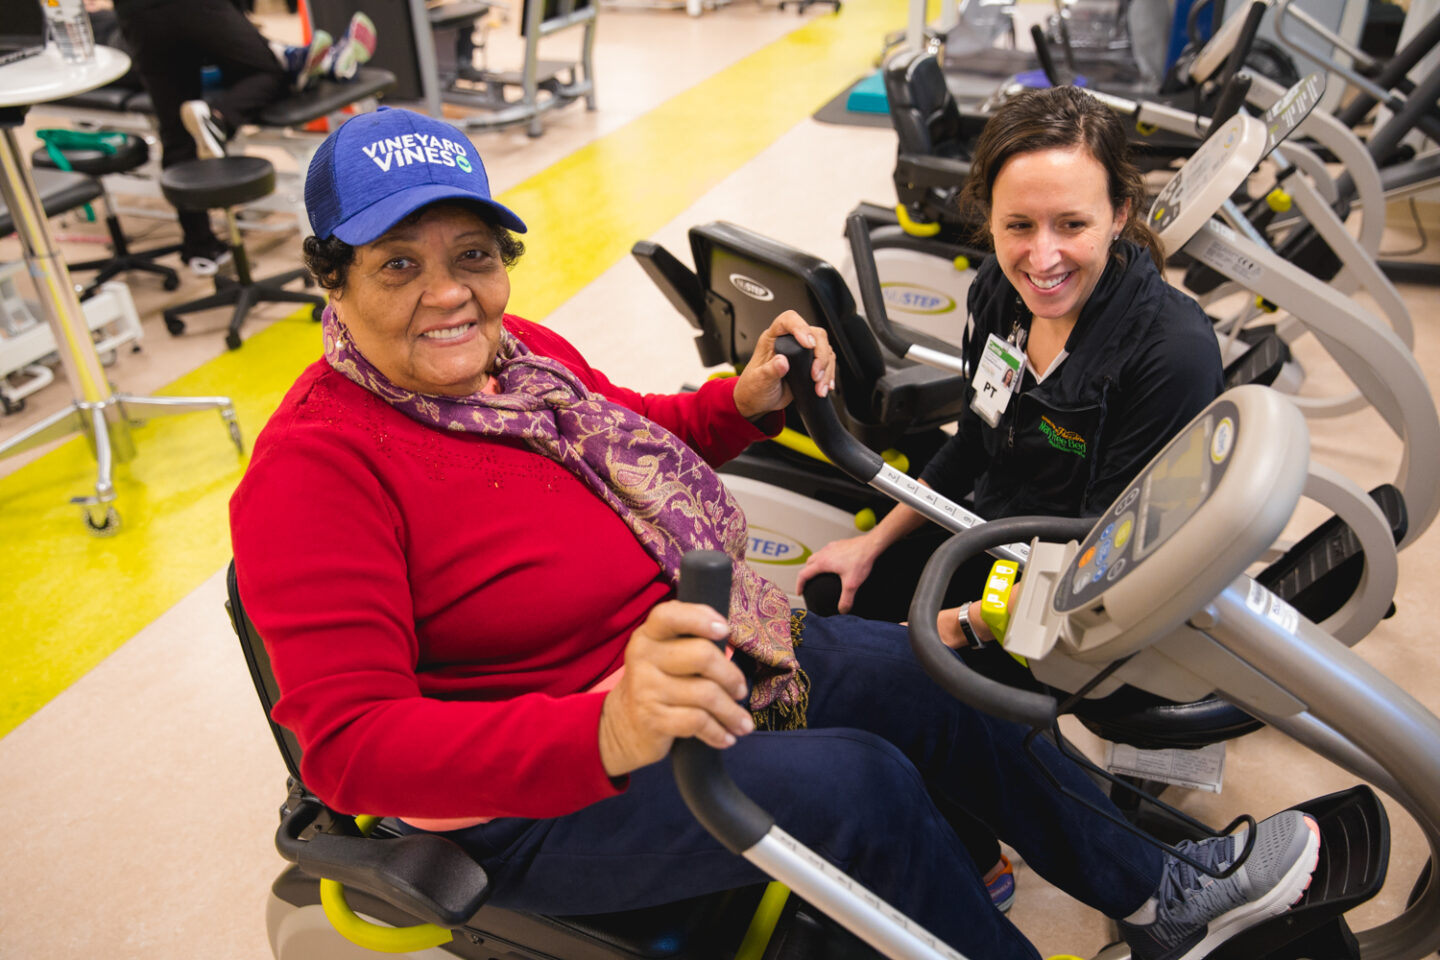 Older adult woman using a recumbent bike during an appointment with a physical therapist at Mary Free Bed.